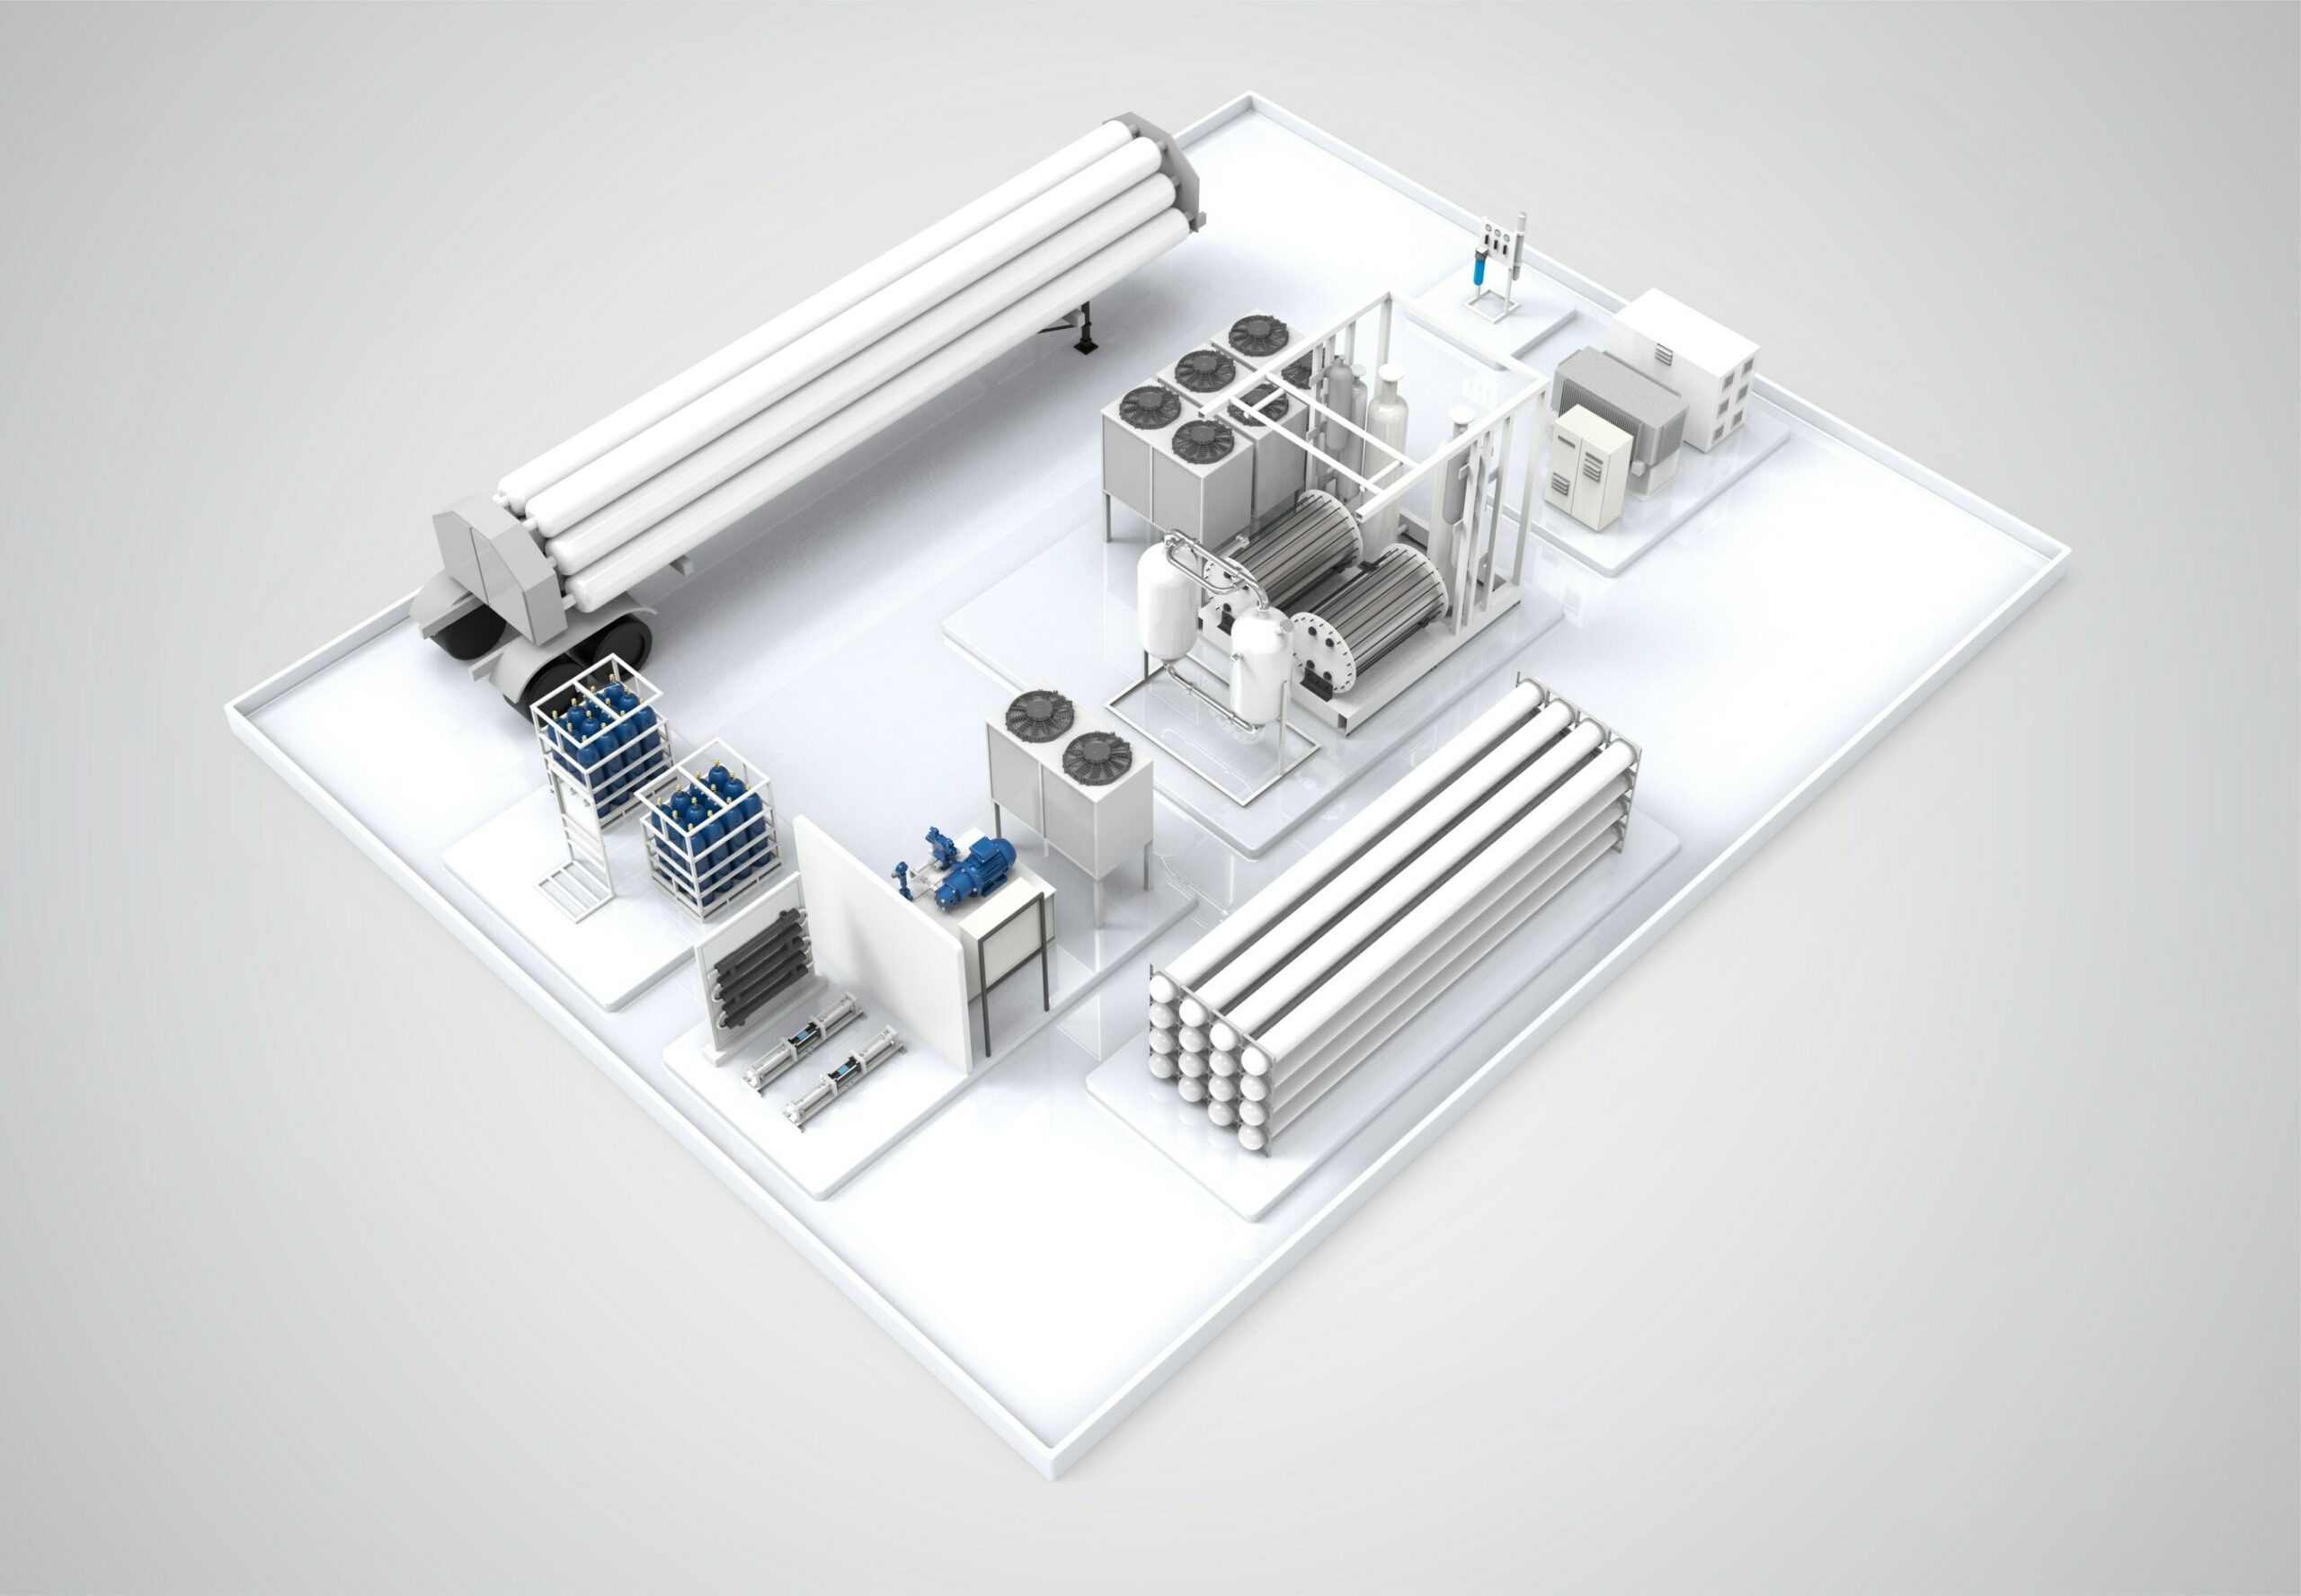 Introducing HNO International's Scalable Hydrogen Energy Platform (SHEP). A 3D render of SHEP's major components.